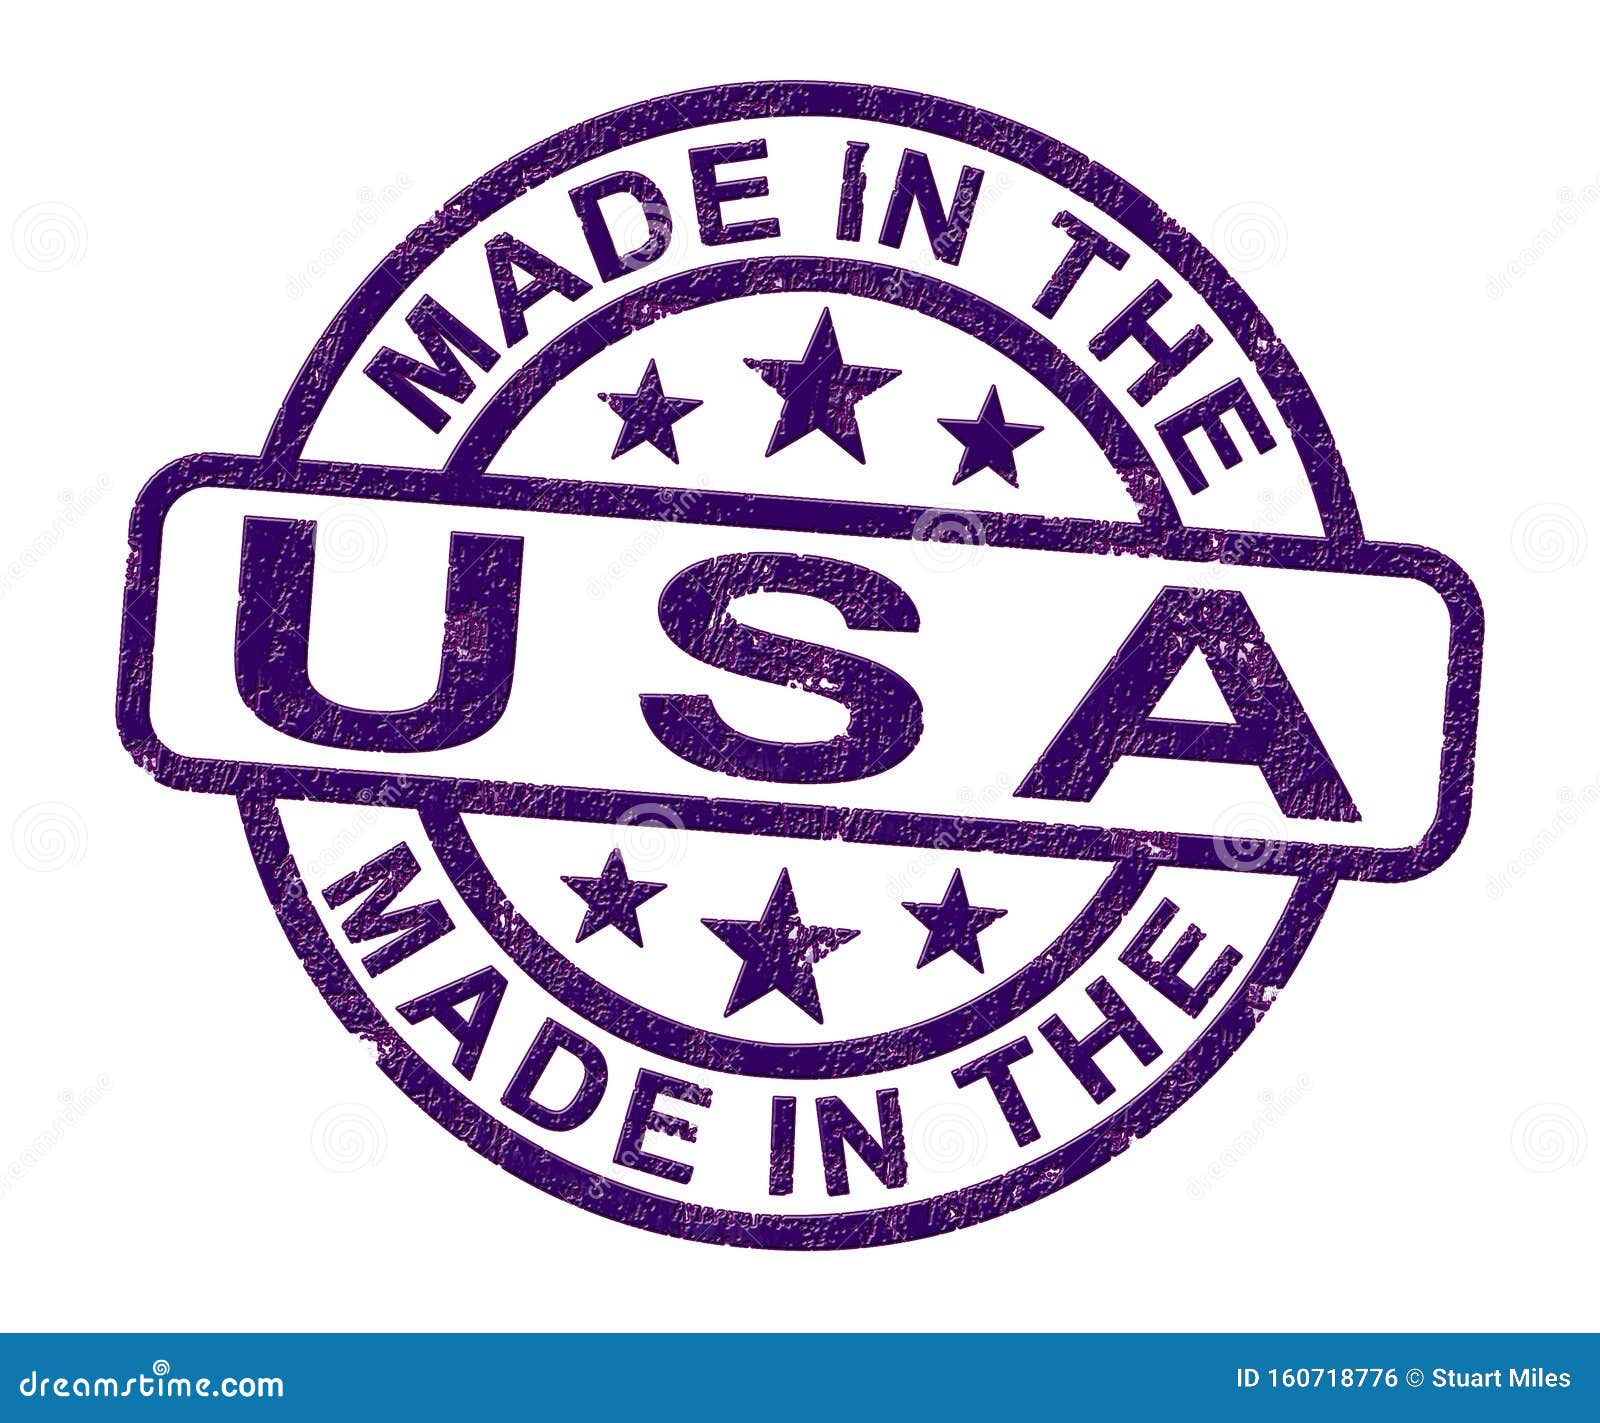 made in the usa stamp shows american products produced or fabricated in america - 3d 